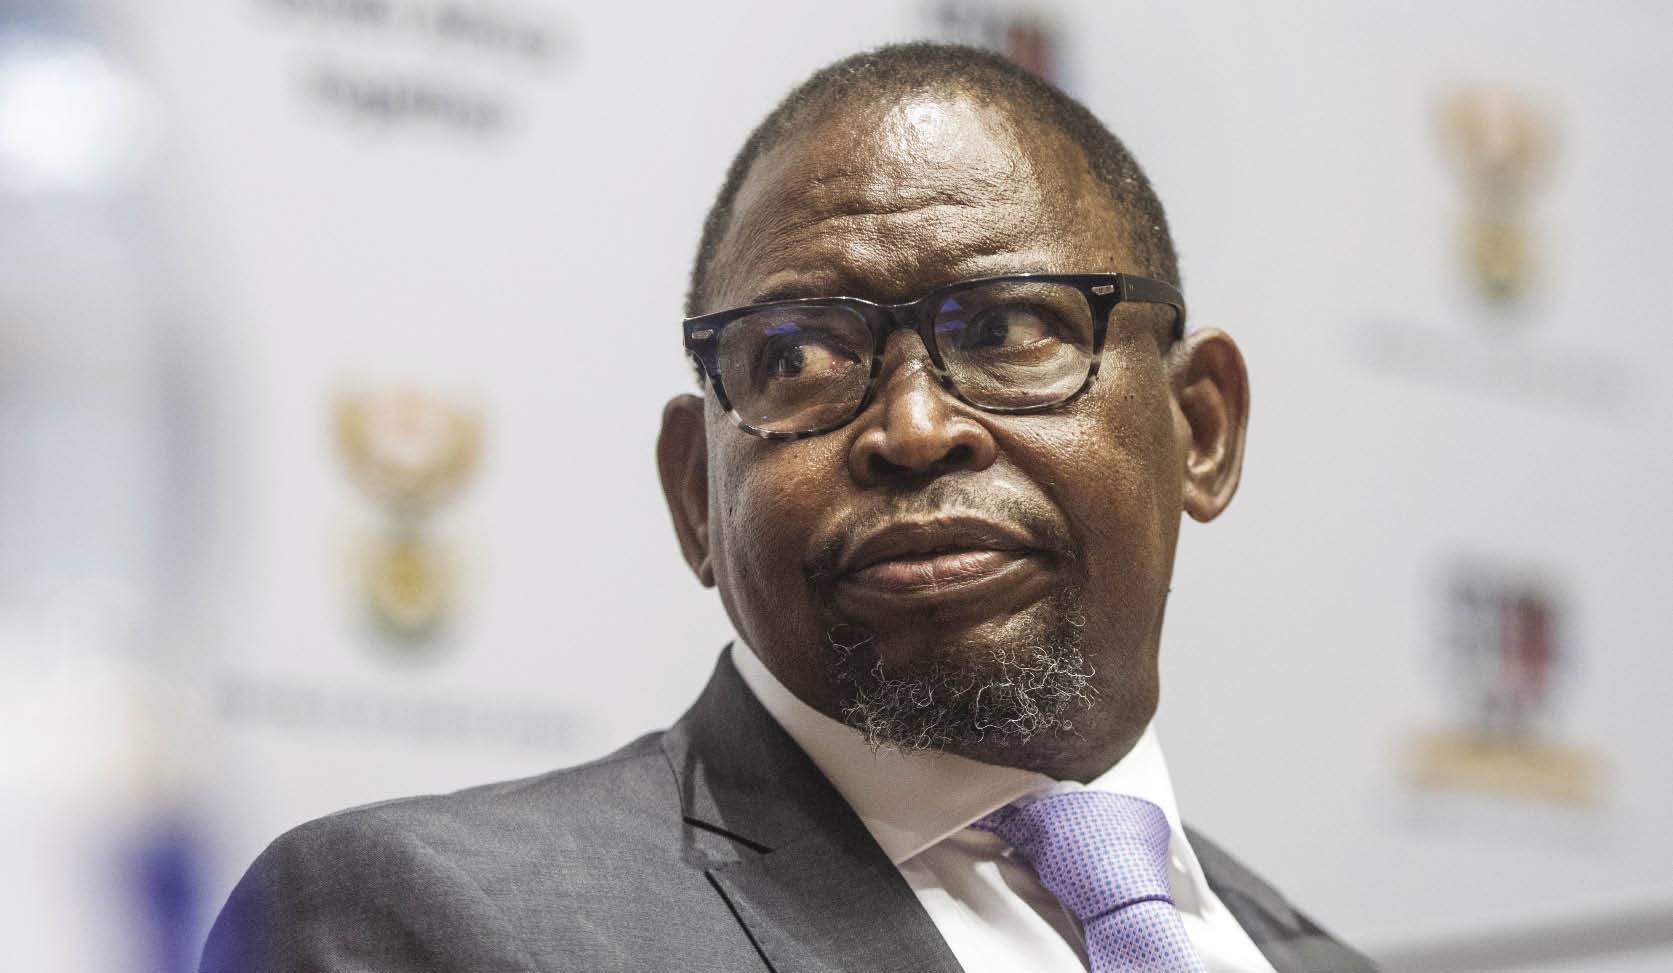 Finance Minister Enoch Godongwana last week called Eskom’s deteriorating performance "inexplicable" saying that the department of mineral resources and energy needs to "urgently" procure more energy generation capability.